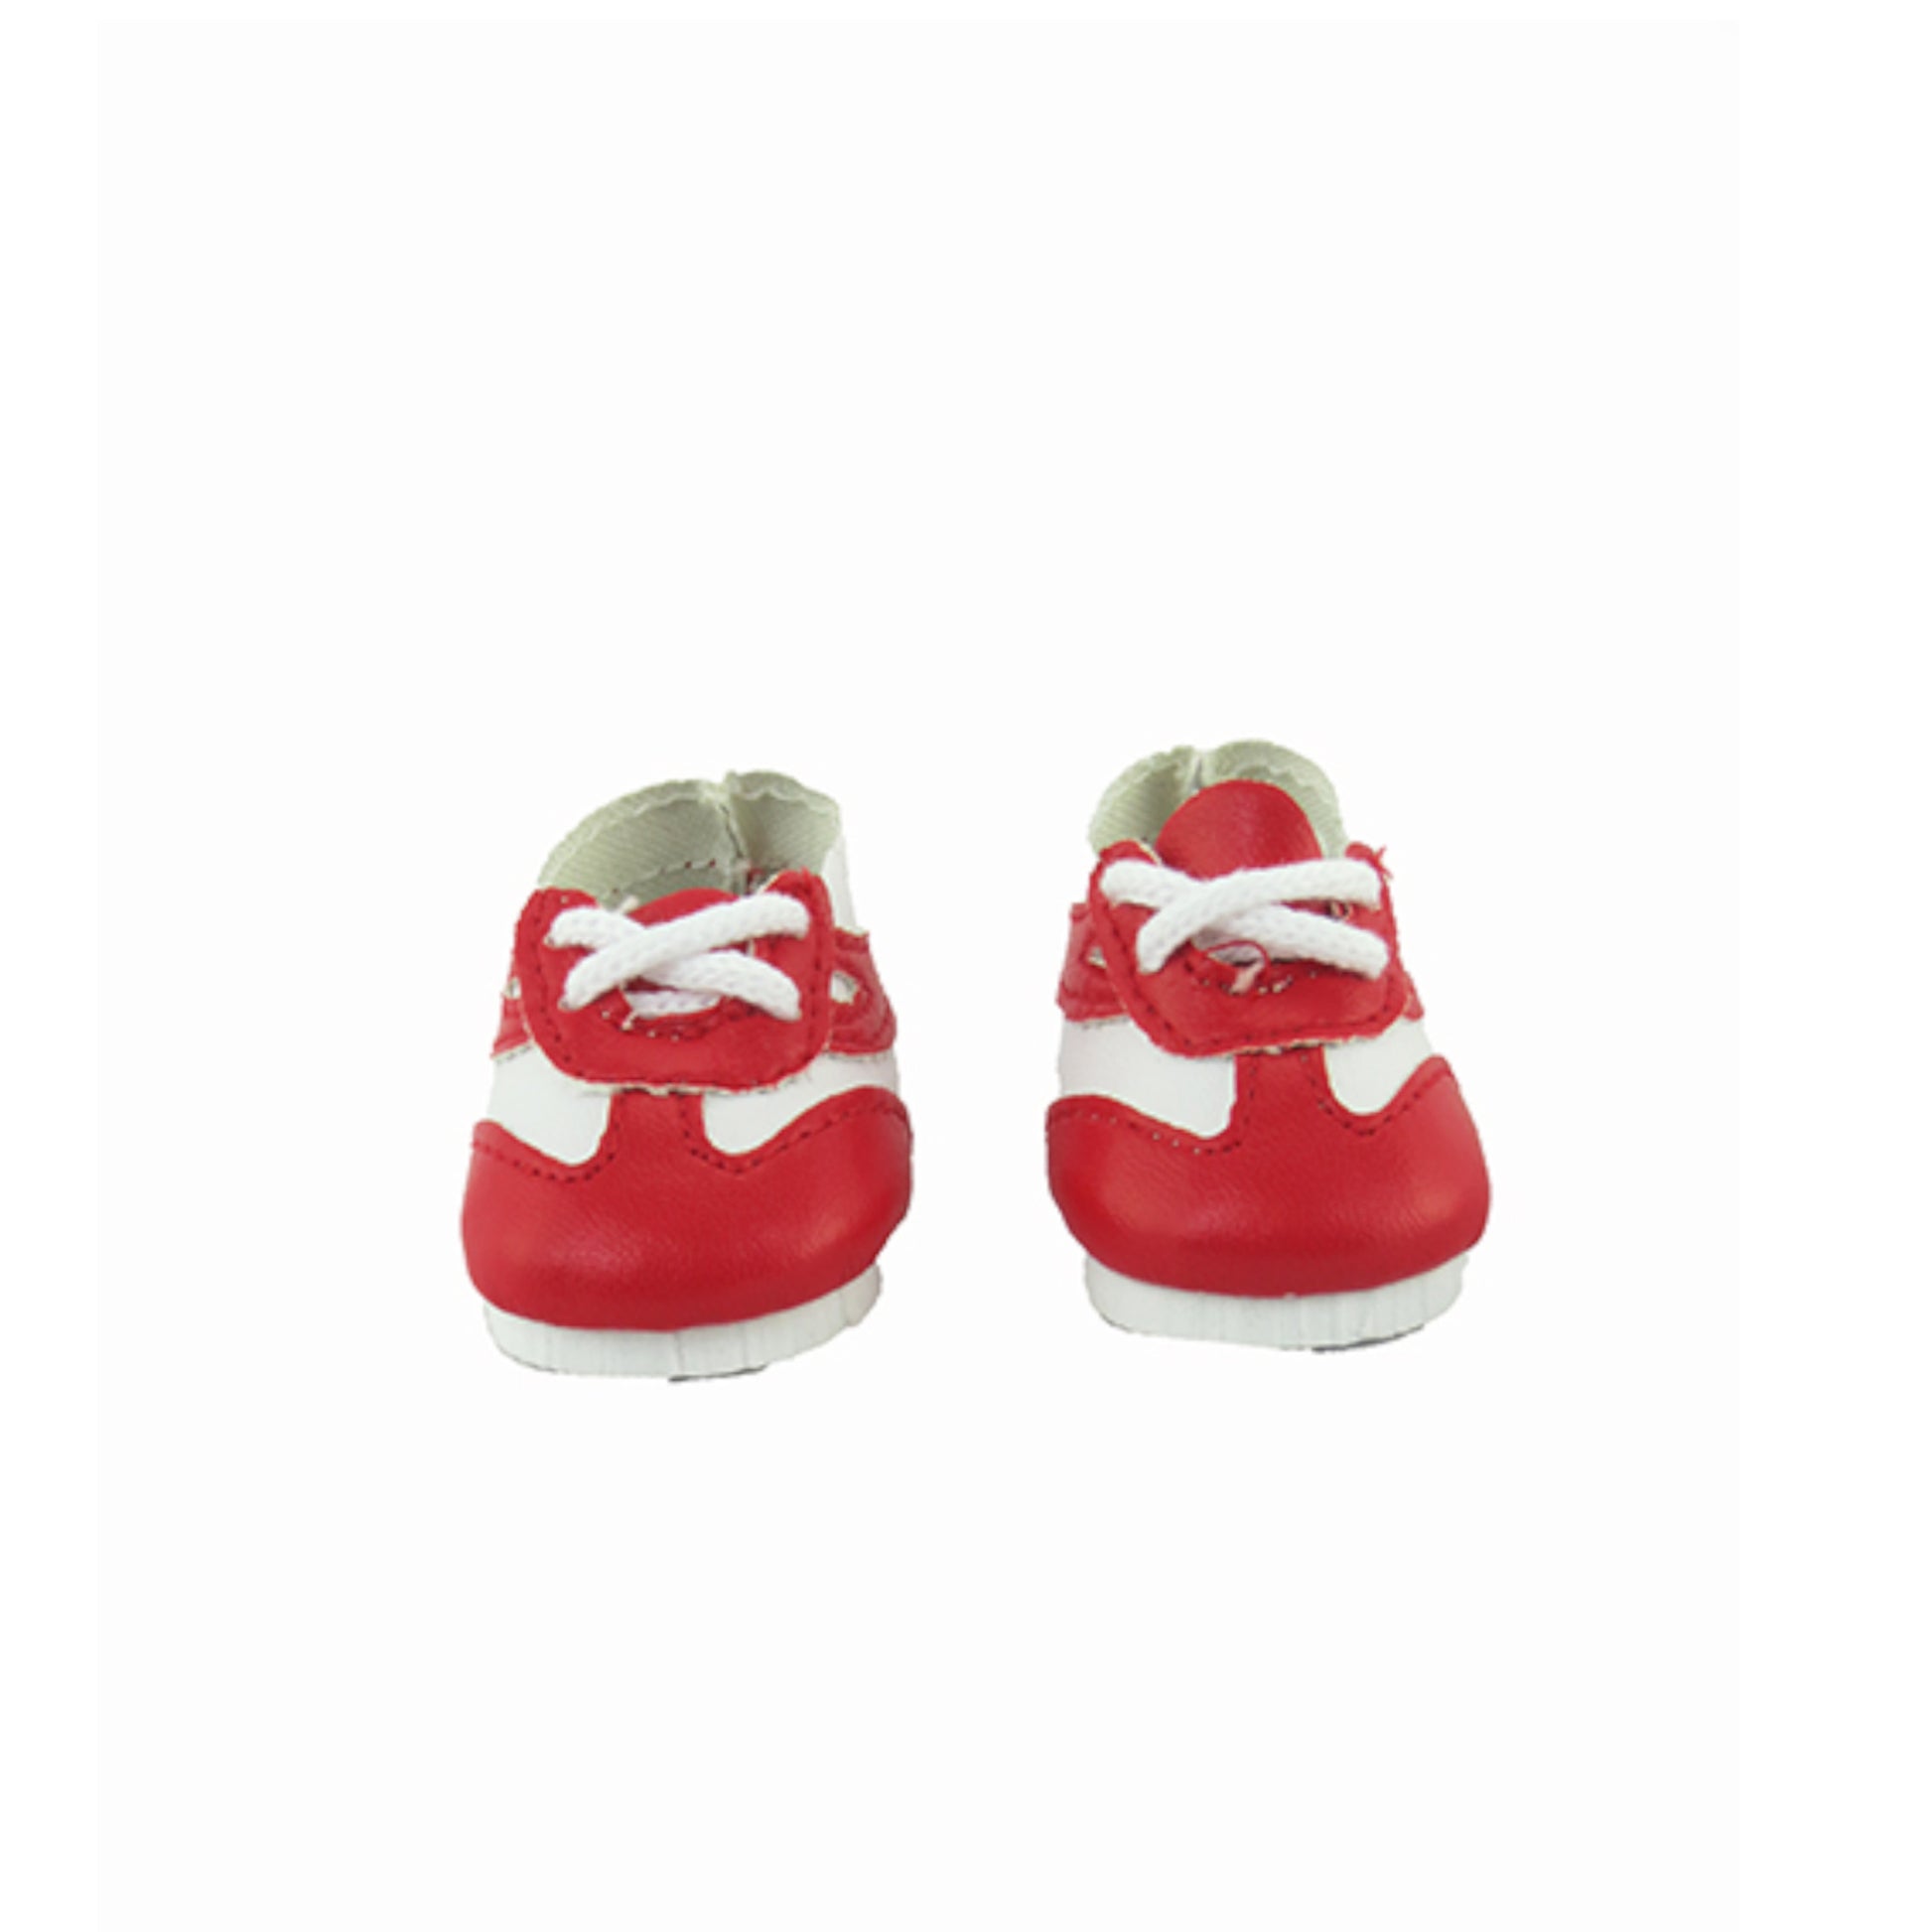 Red Sneakers for 14 1/2-inch dolls